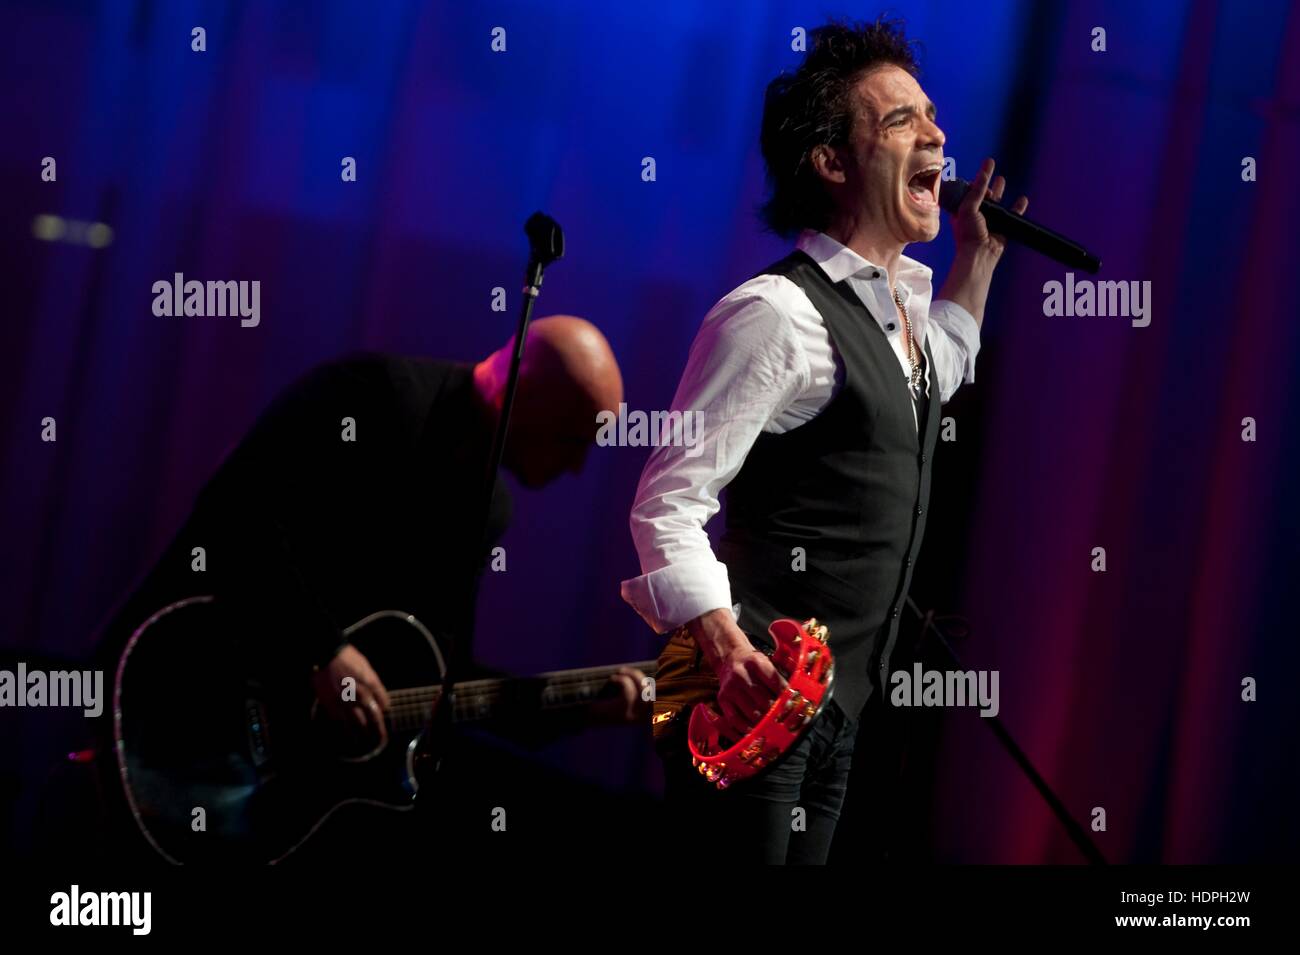 Rock band Train musicians Patrick Monahan (left) and Jimmy Stafford perform at the Stand Up for Heroes dinner at the Ronald Reagan Building June 16, 2011 in Washington, DC. Stock Photo